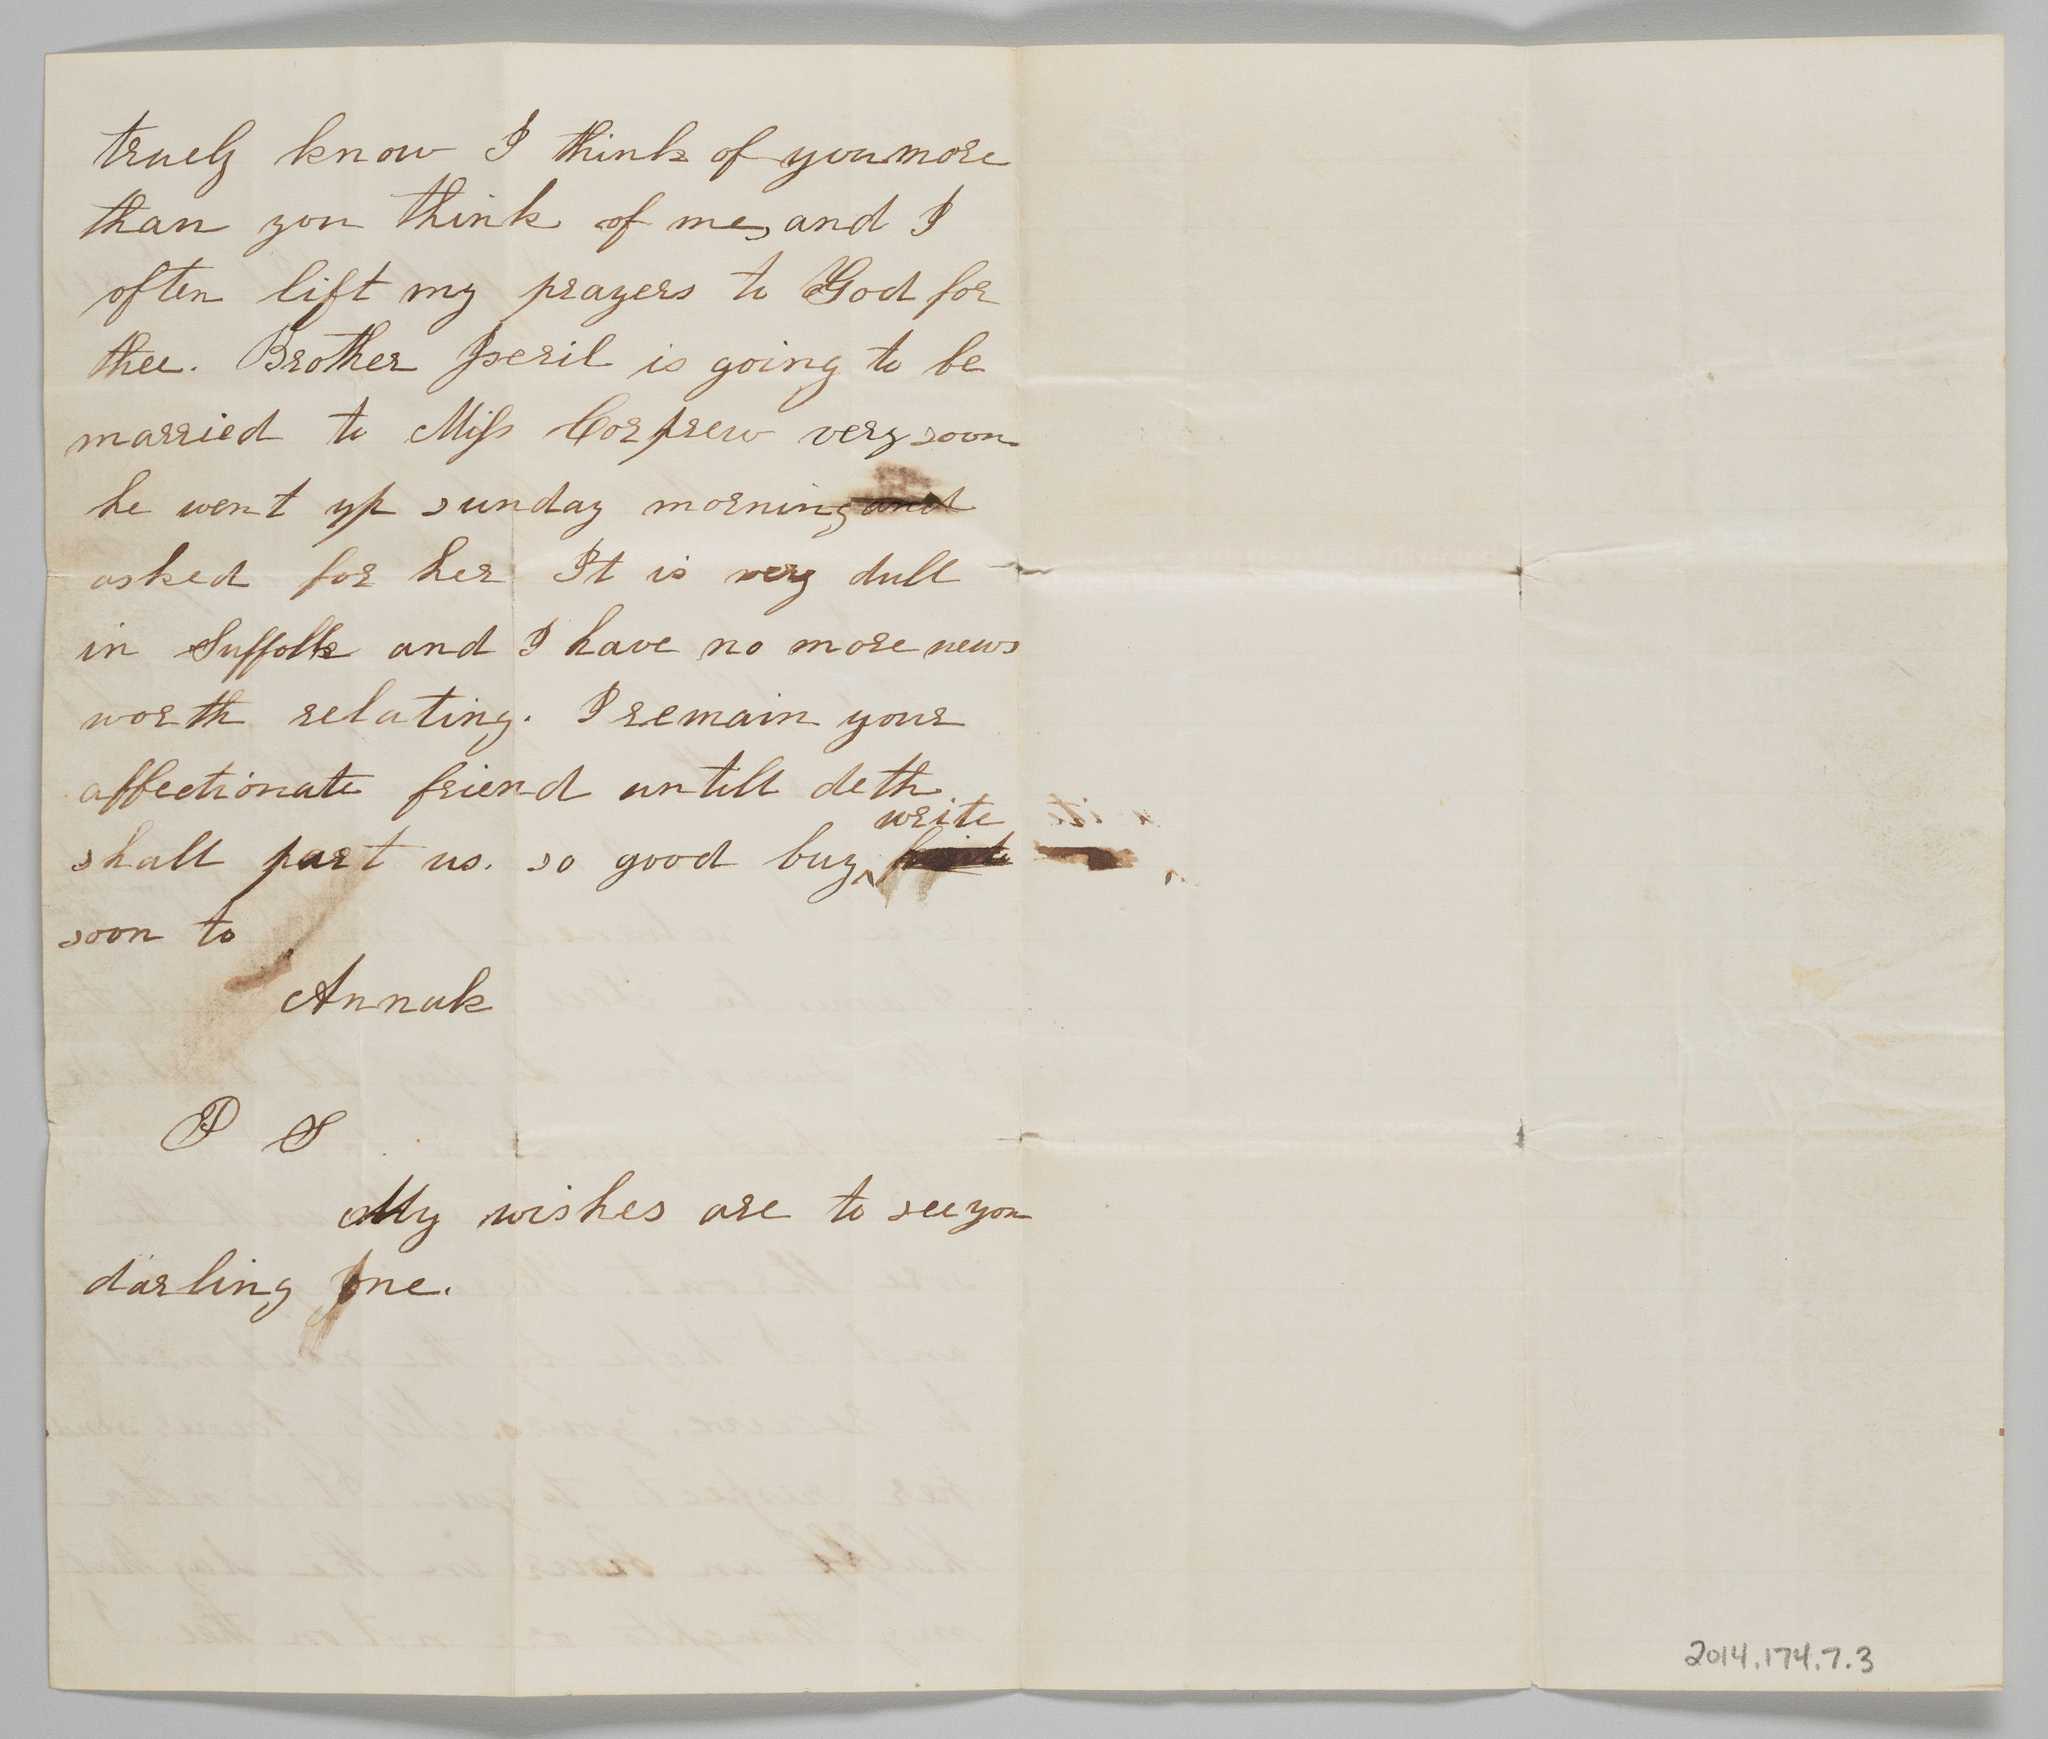 This letter was written on February 18, 1861, by Ann Hurst Copeland to her husband John H. Copeland. The letter details the recent betrothals of several friends and Ann, who signed the letter "Annuk," comments she has been ill. She also expresses her devotion to Copeland, writing "It is not a half an hour in the day that my thoughts are not on thee." She also mentions that her portrait is included with the letter and she hopes to receive a portrait from him in return.